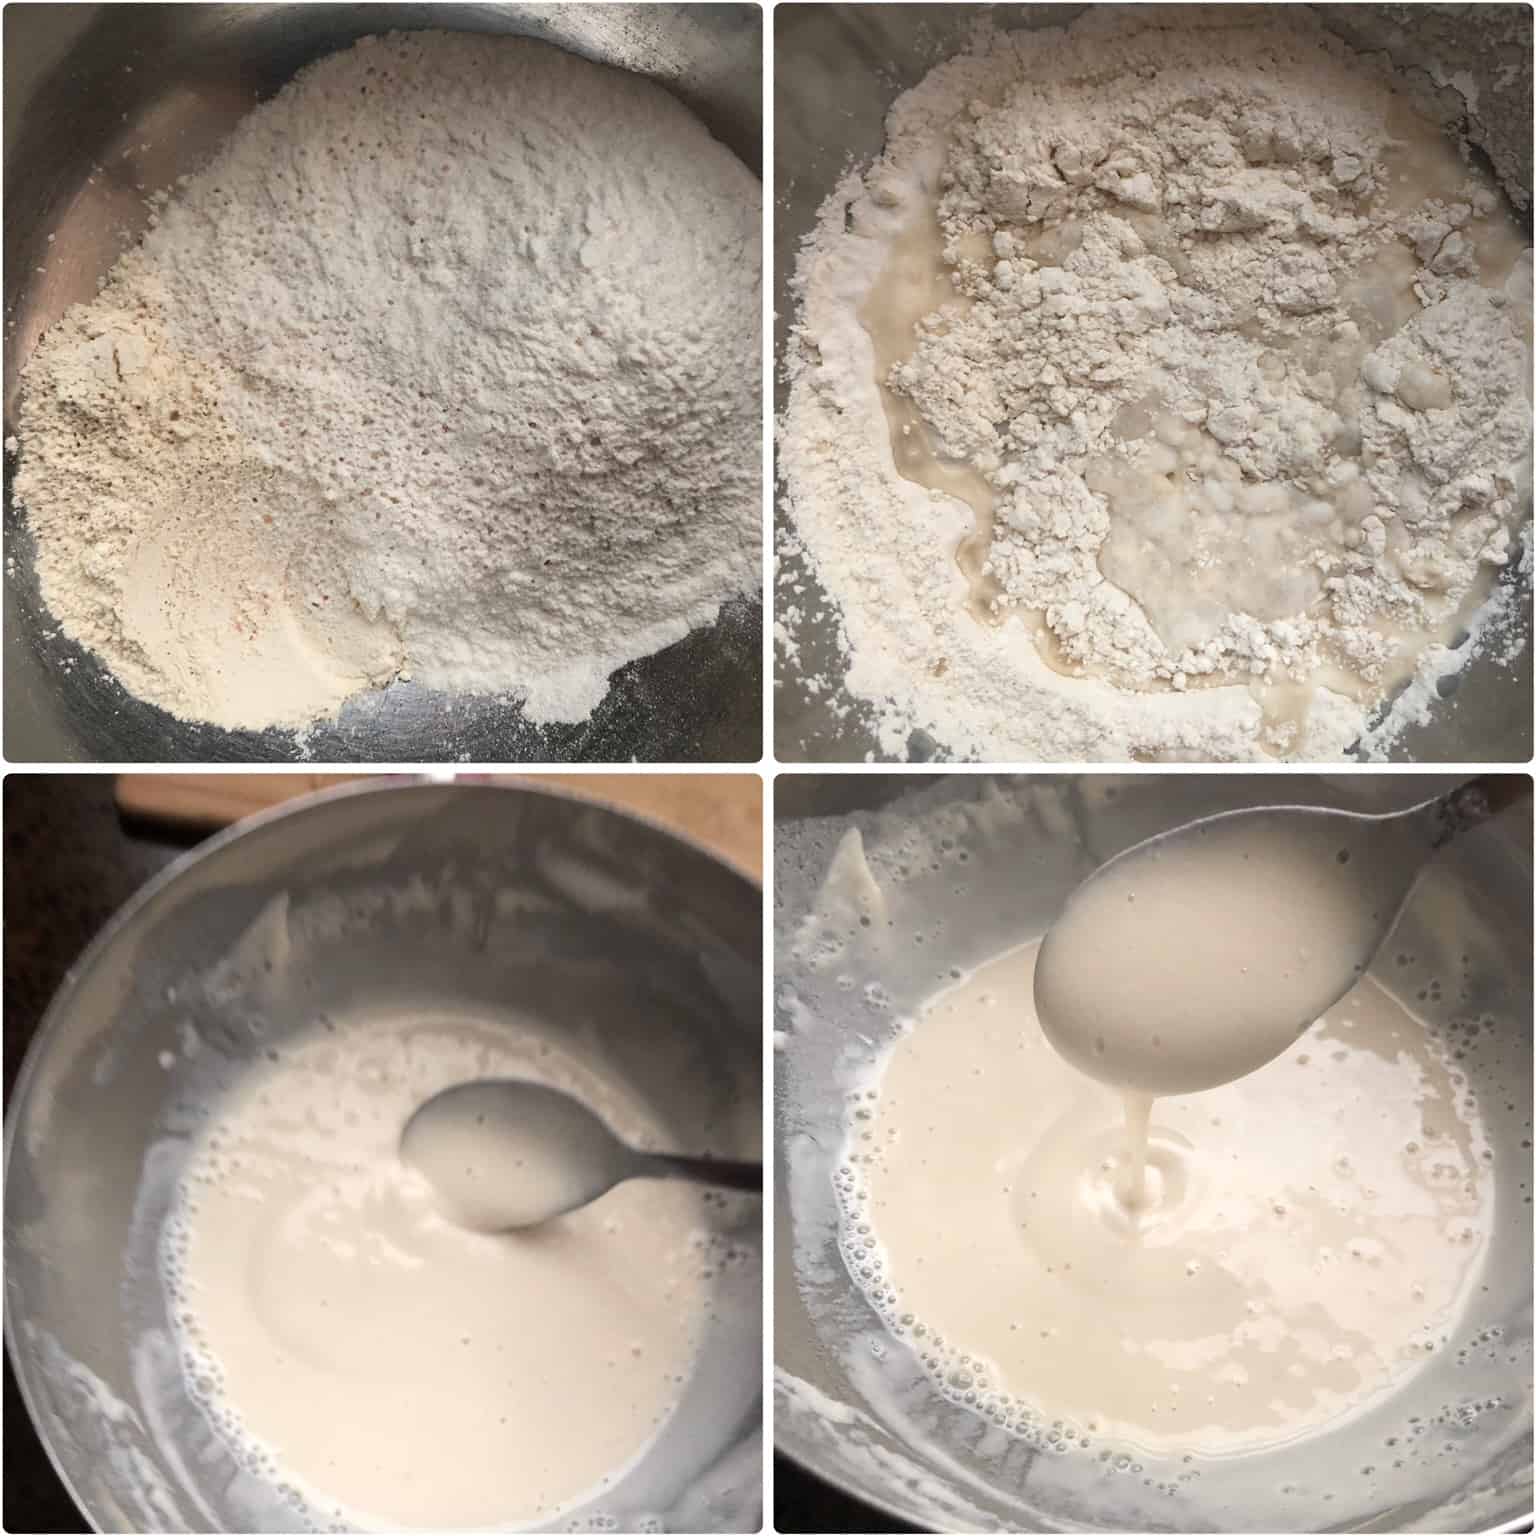 Mixing flour in a bowl to make the outer cover